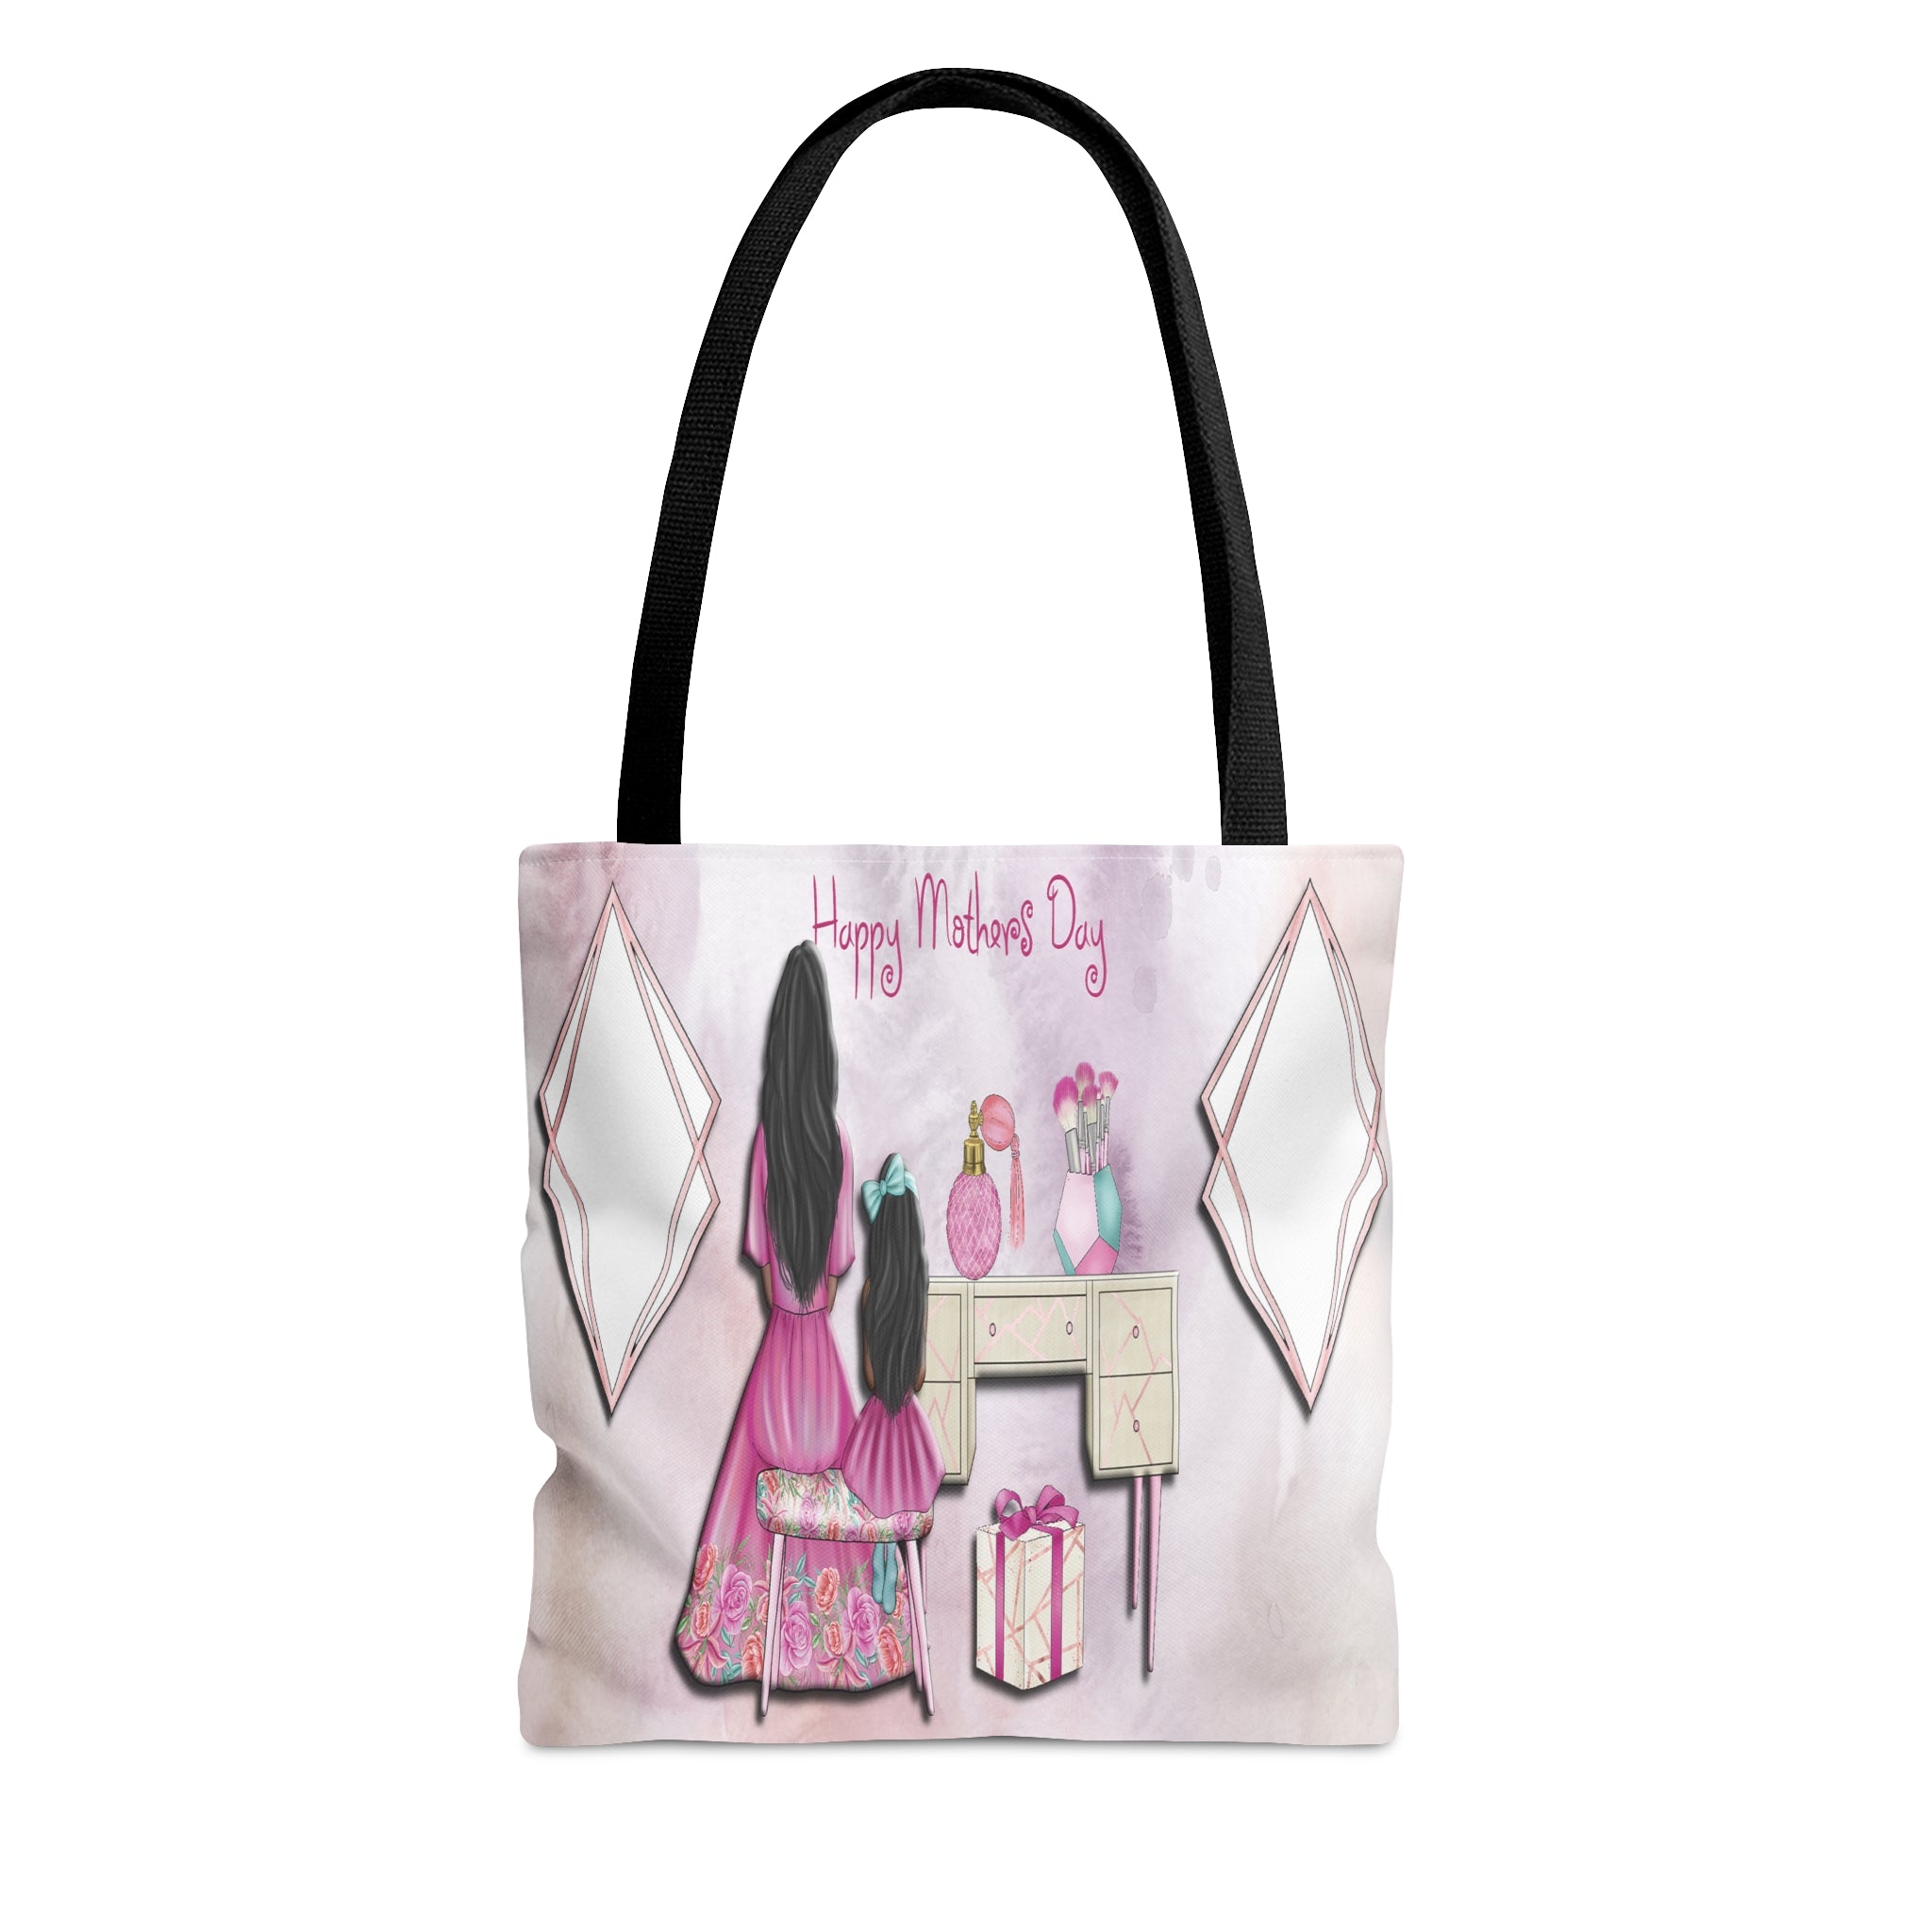 Happy Mothers Day Tote Bag (Brown Girls) (ADD A PICTURE)